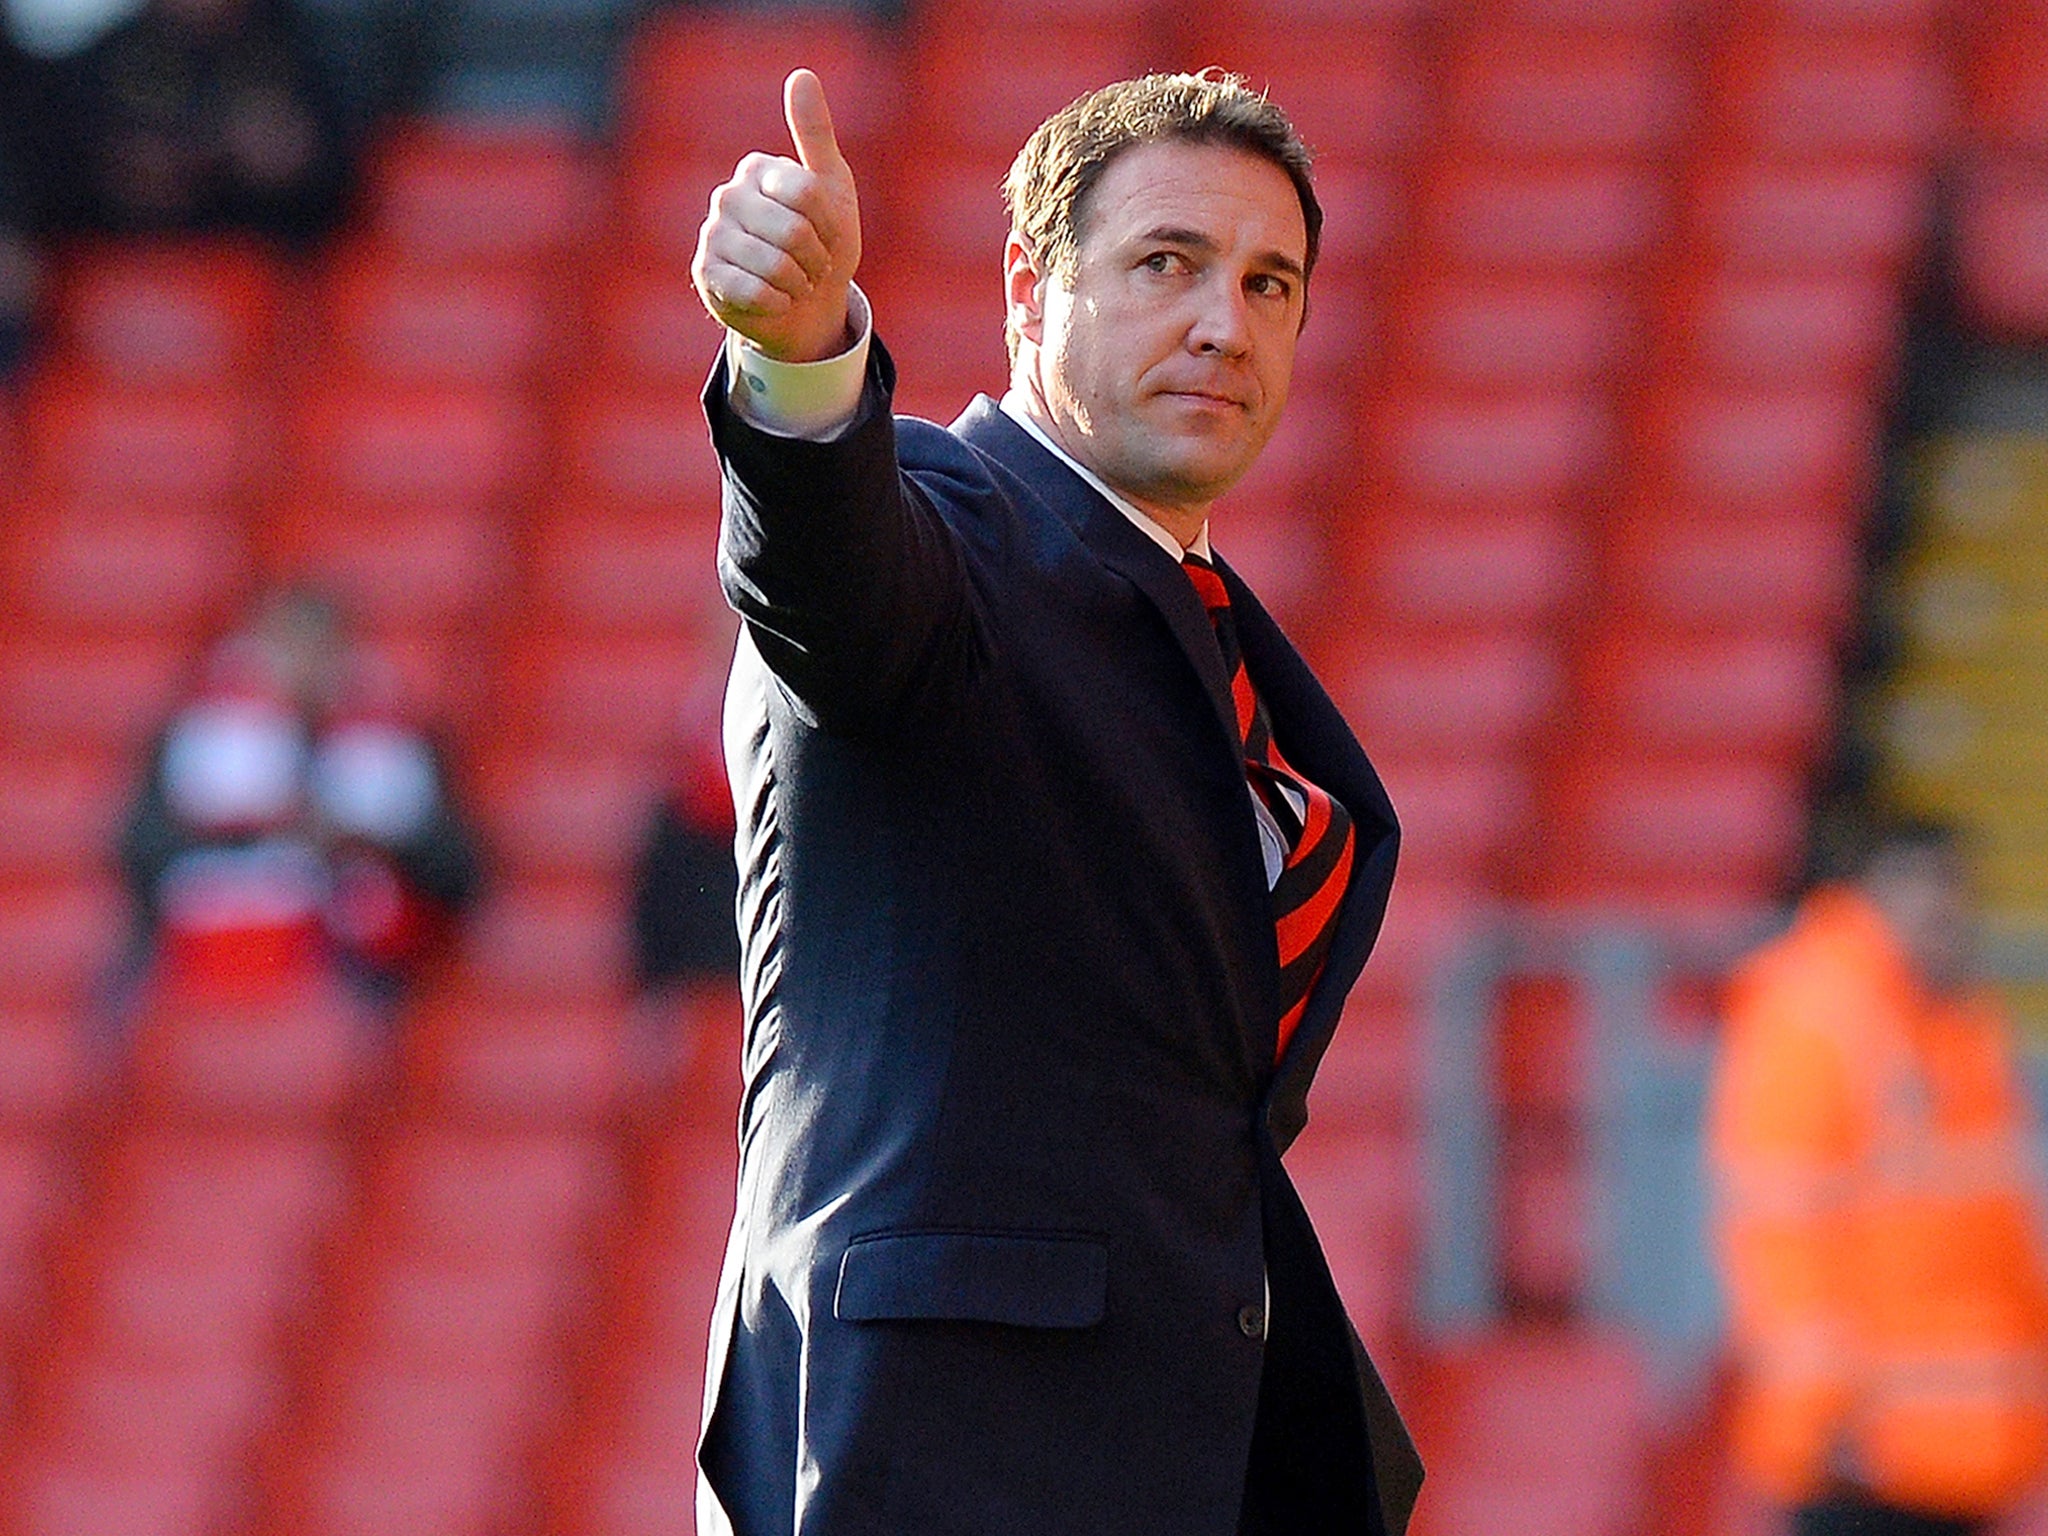 Cardiff City manager Malky Mackay gives the thumbs up to fans ahead of their match against Liverpool